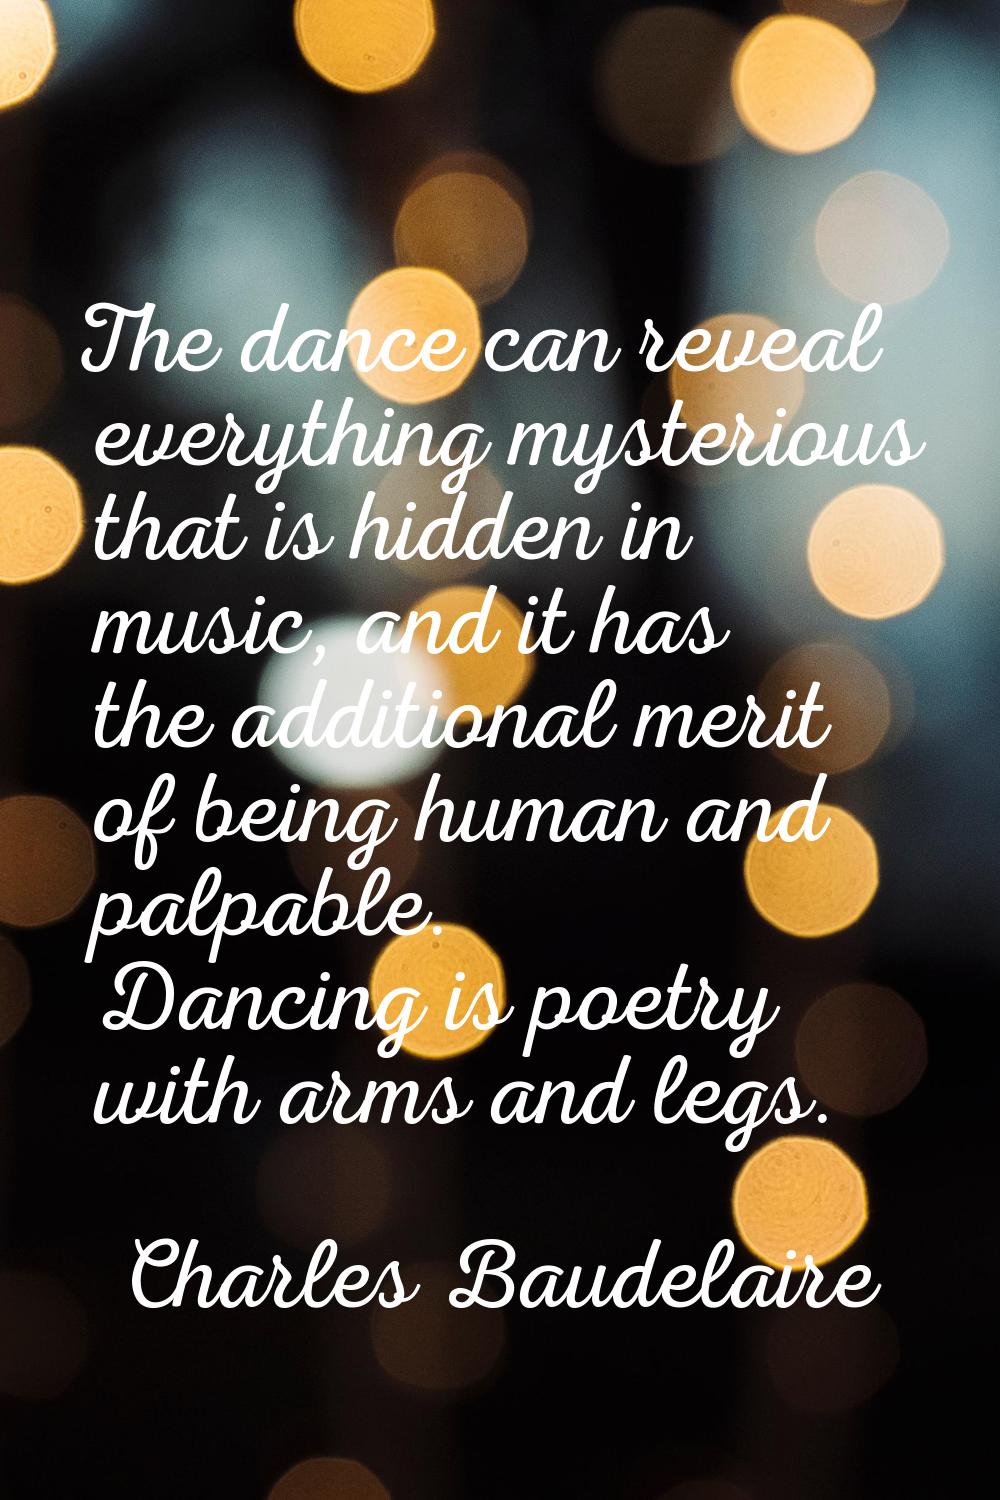 The dance can reveal everything mysterious that is hidden in music, and it has the additional merit